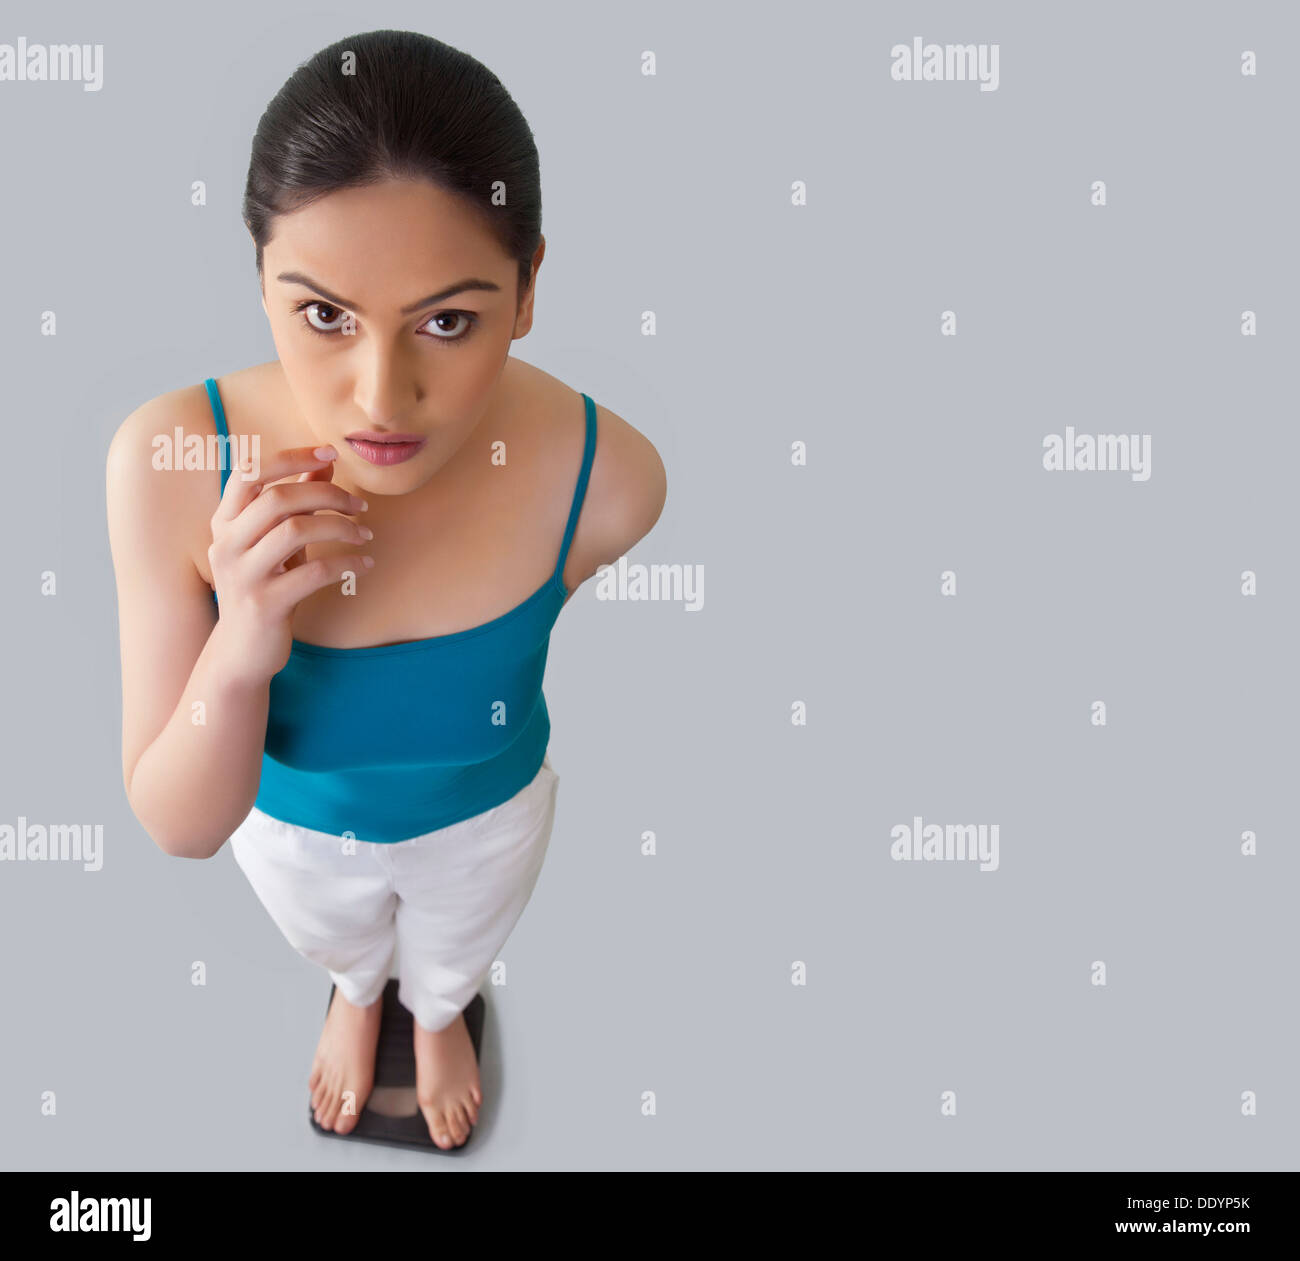 https://c8.alamy.com/comp/DDYP5K/portrait-of-worried-young-woman-standing-on-weighing-scale-against-DDYP5K.jpg